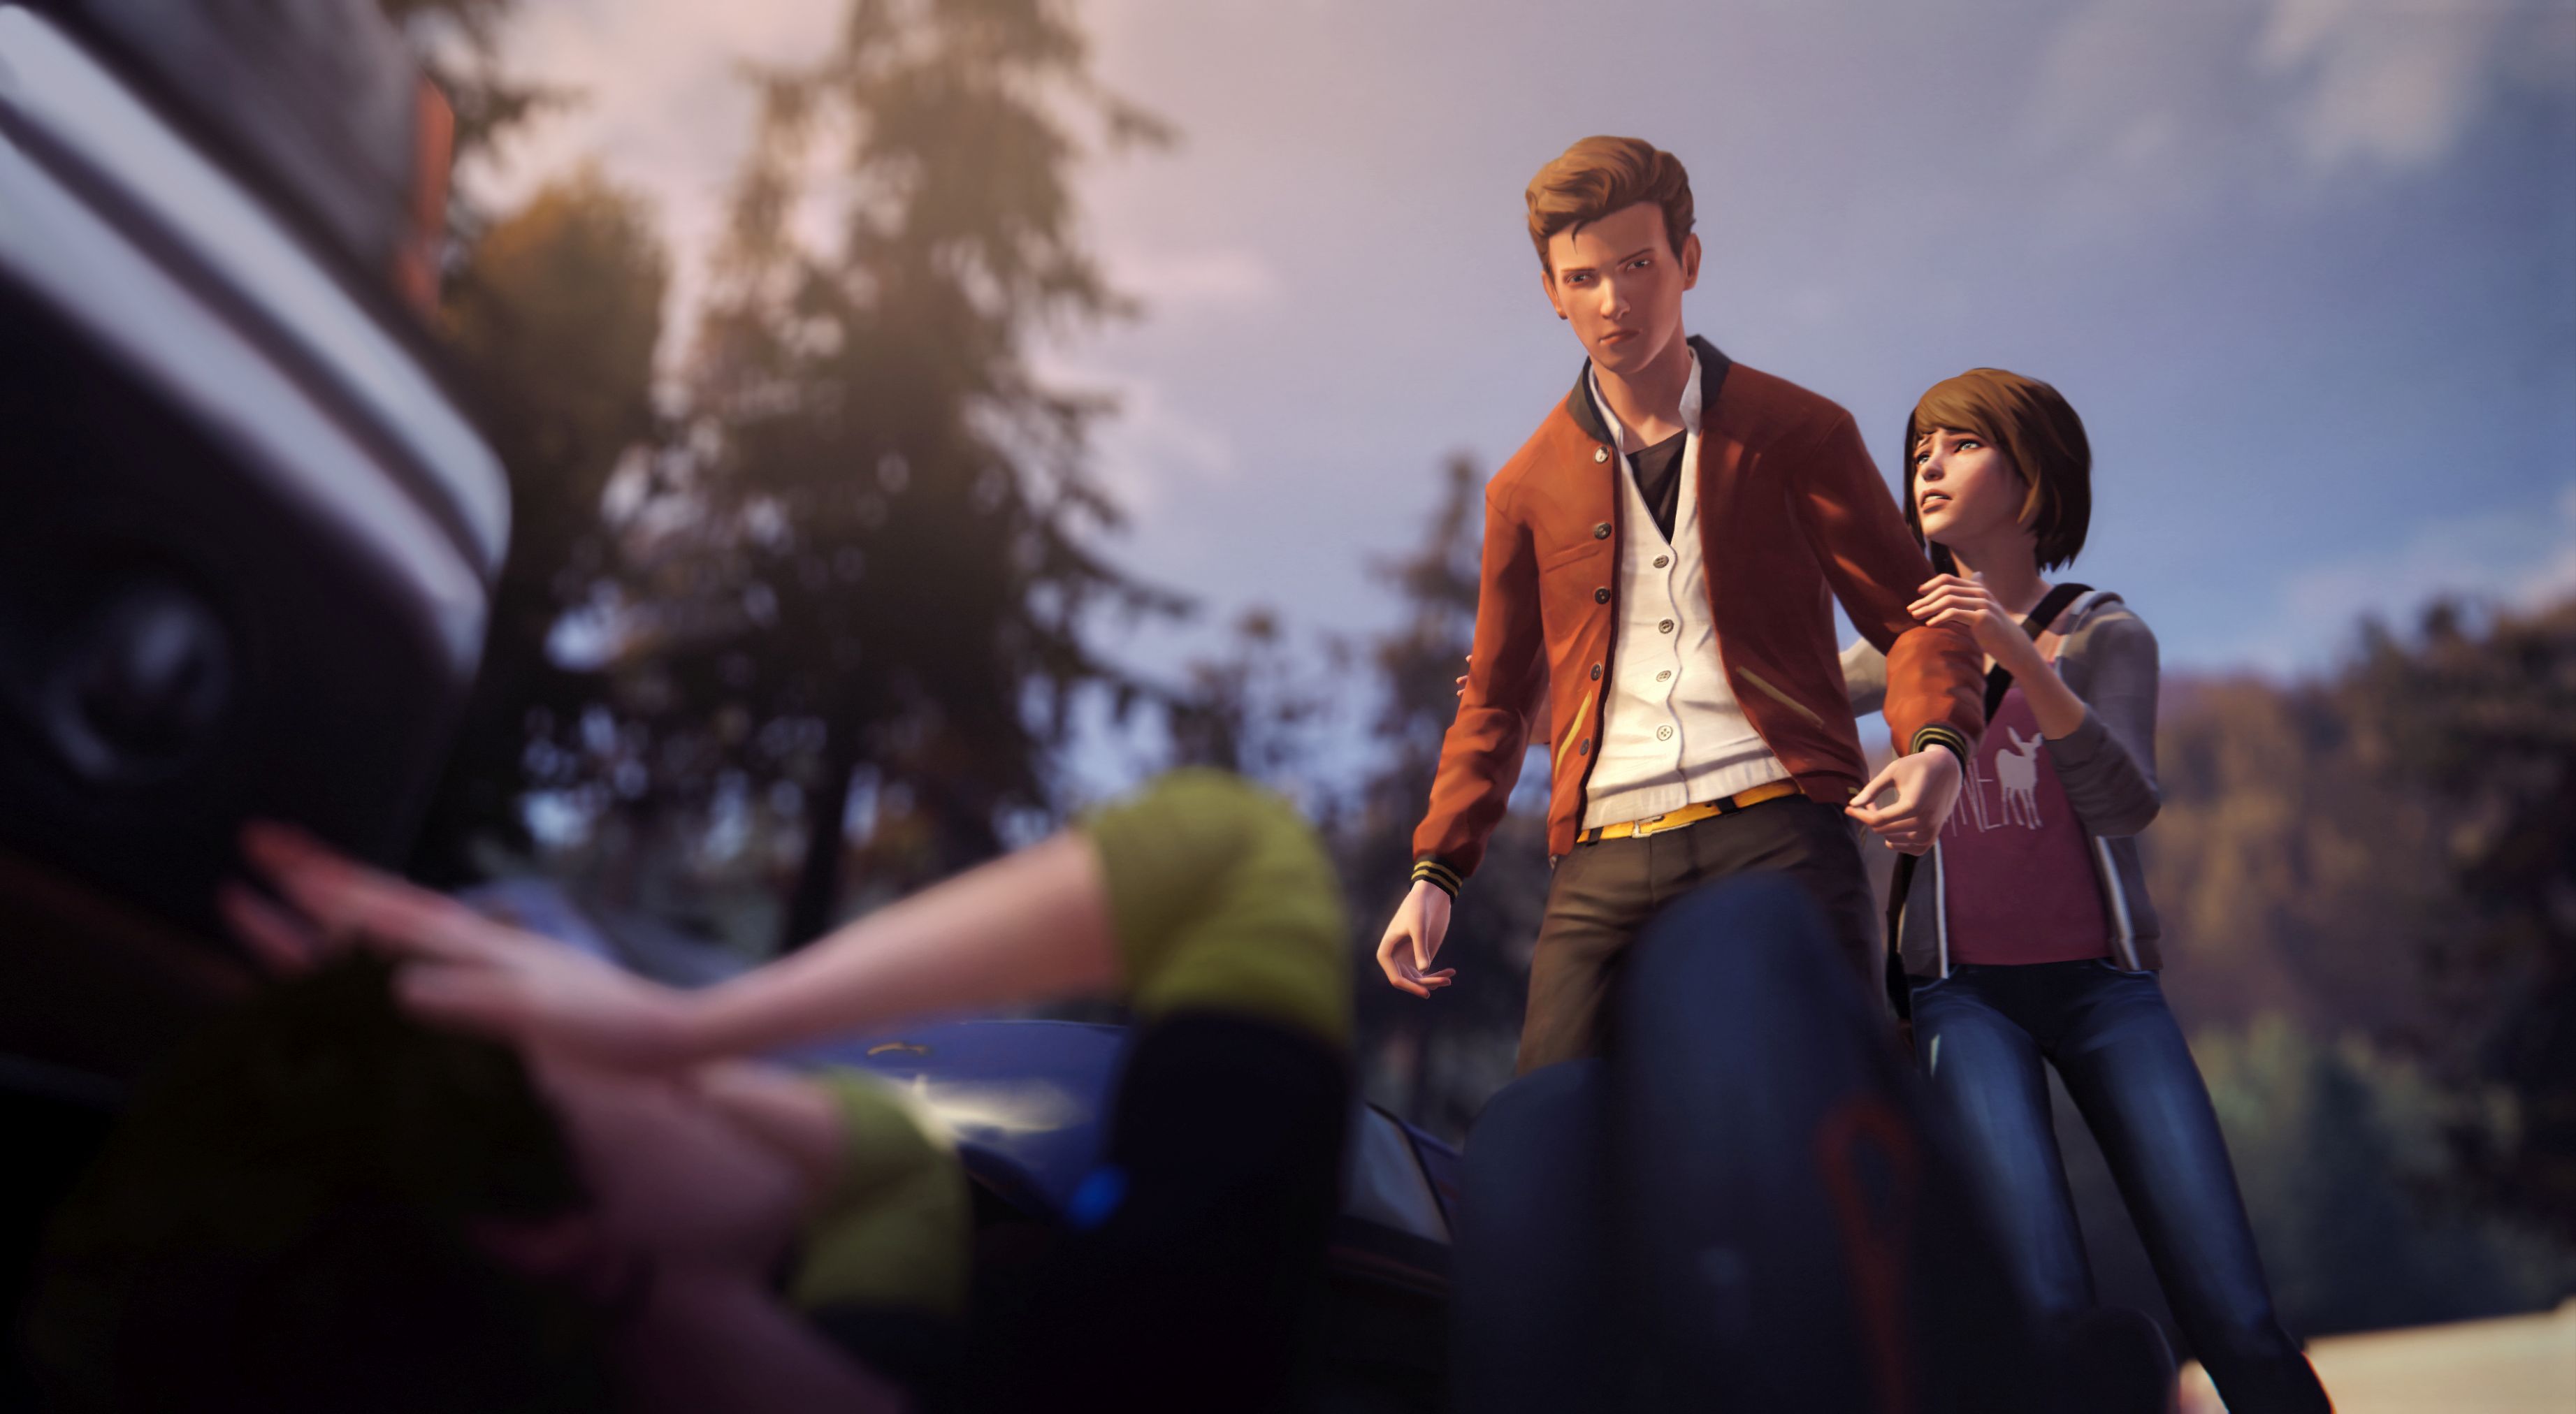 Most Viewed Life Is Strange Wallpapers 4k Wallpapers